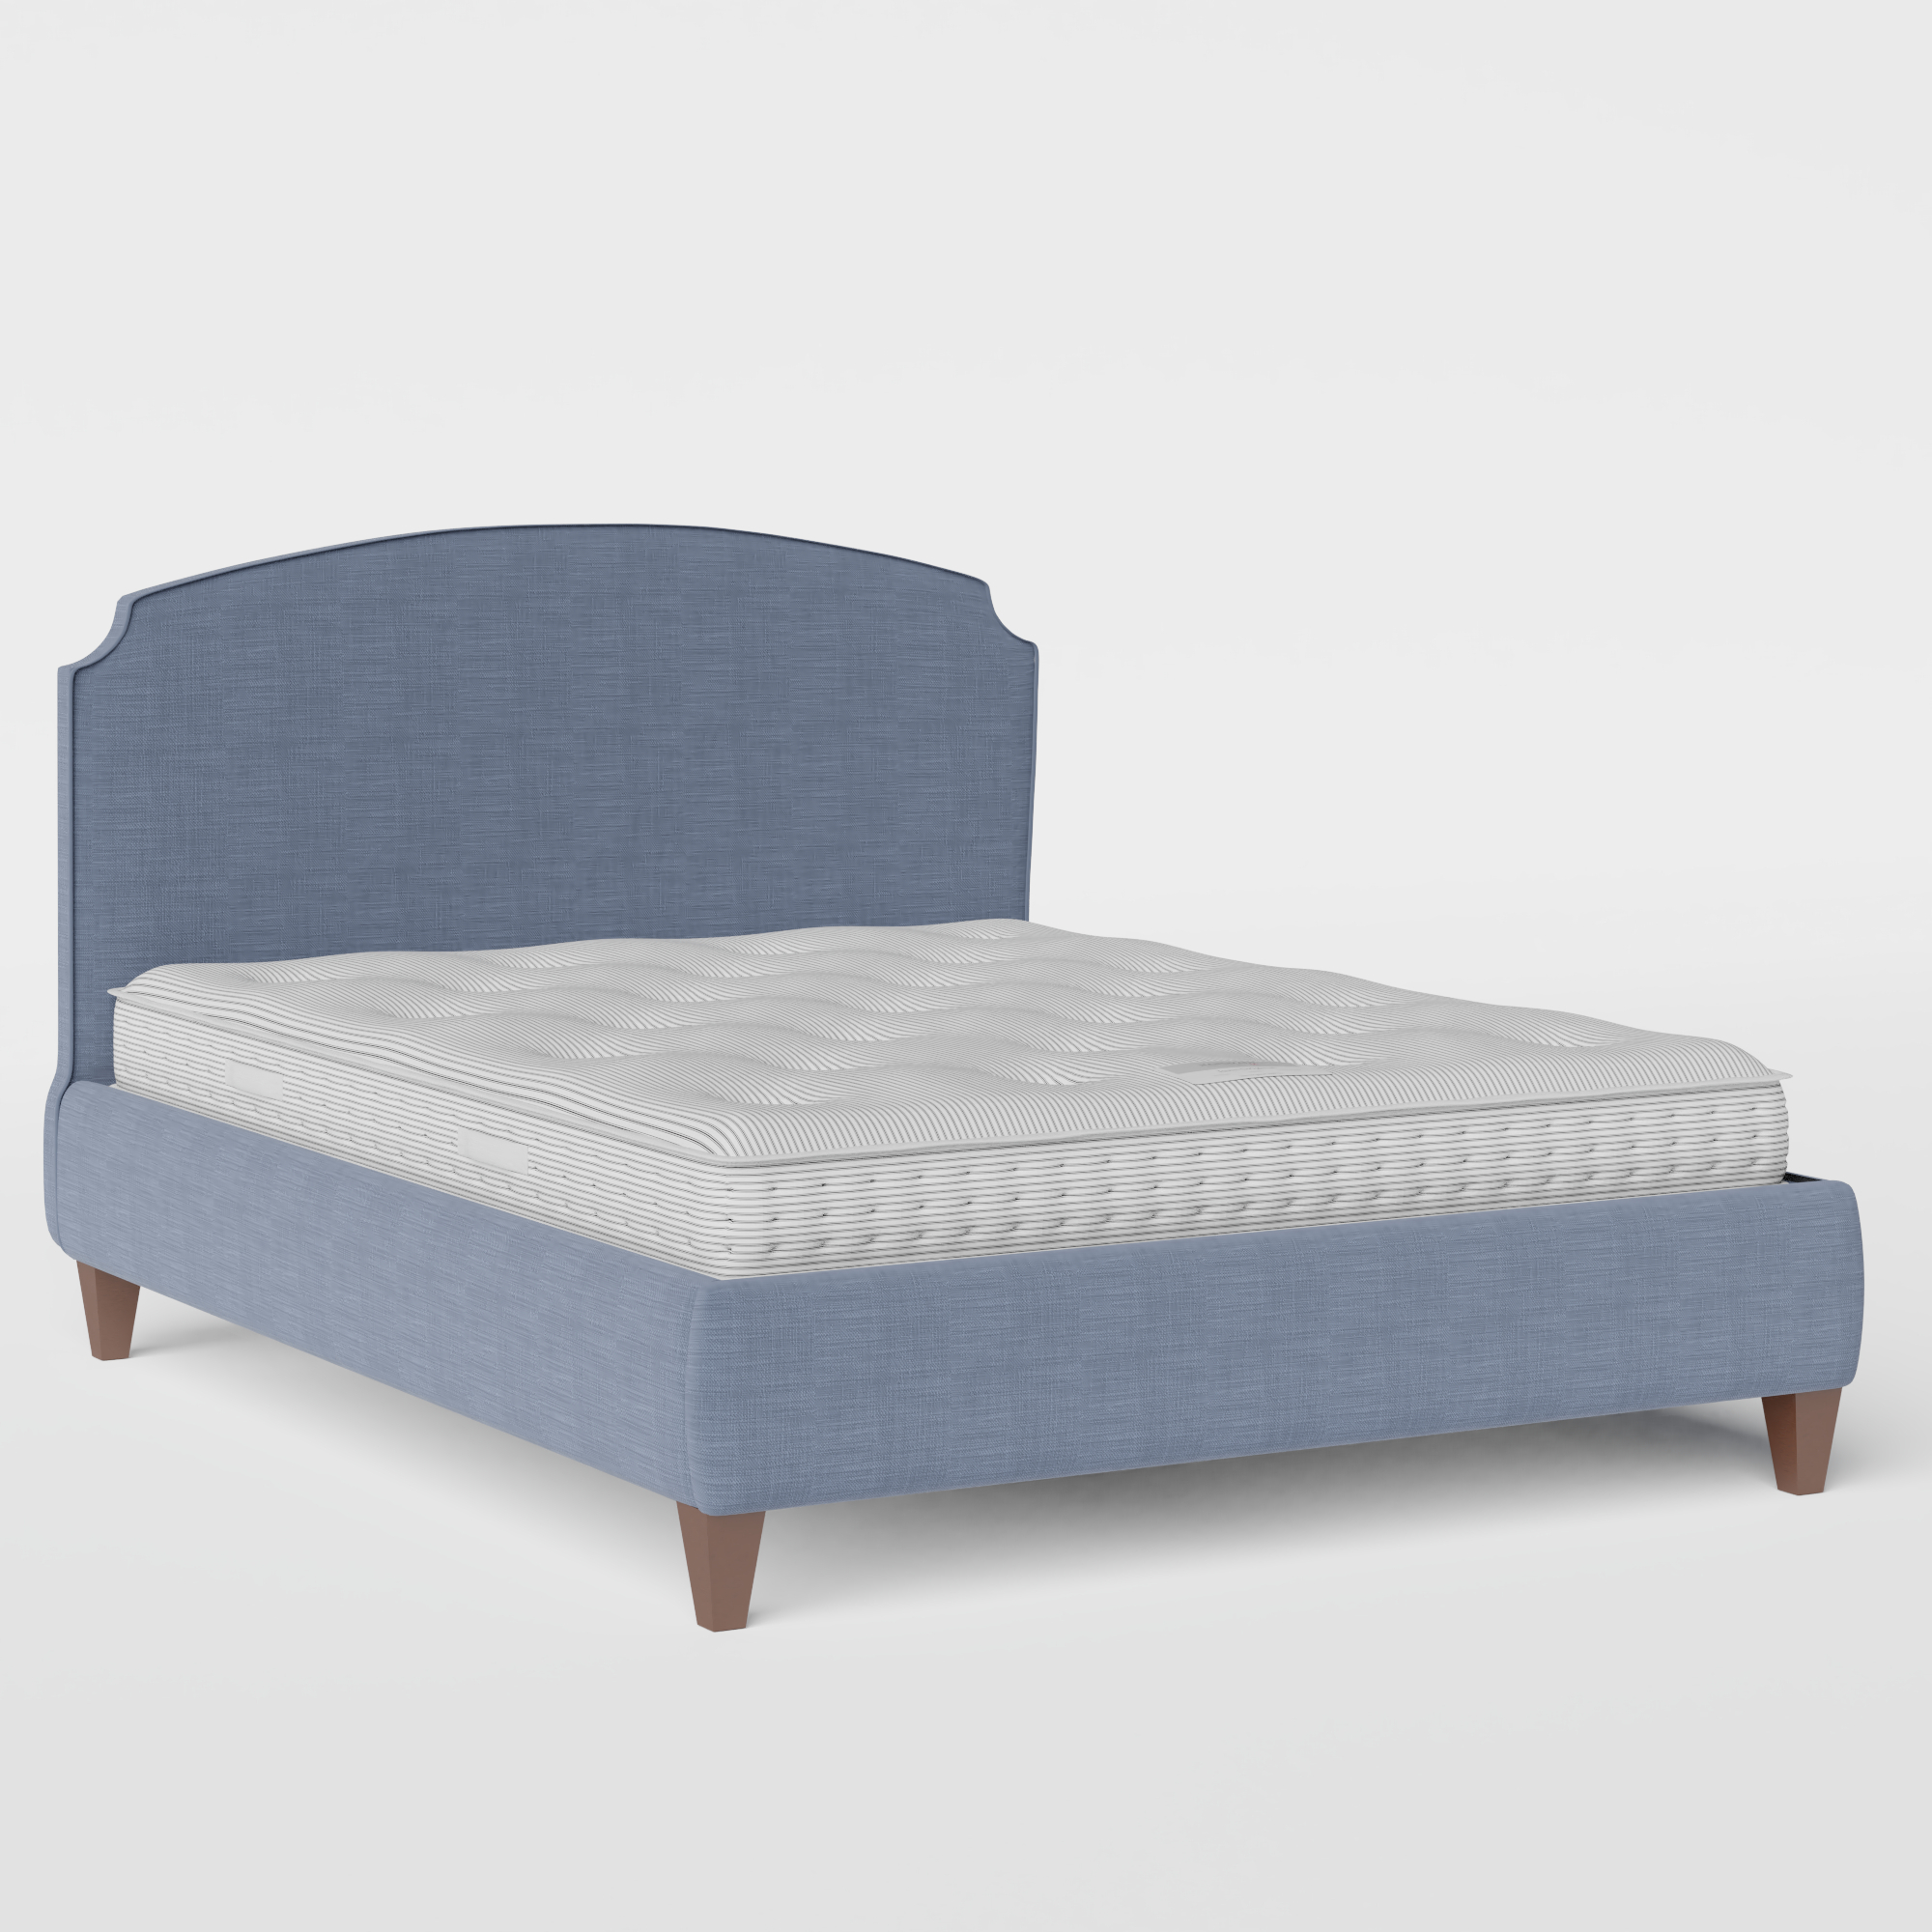 Lide with Piping upholstered bed in blue fabric